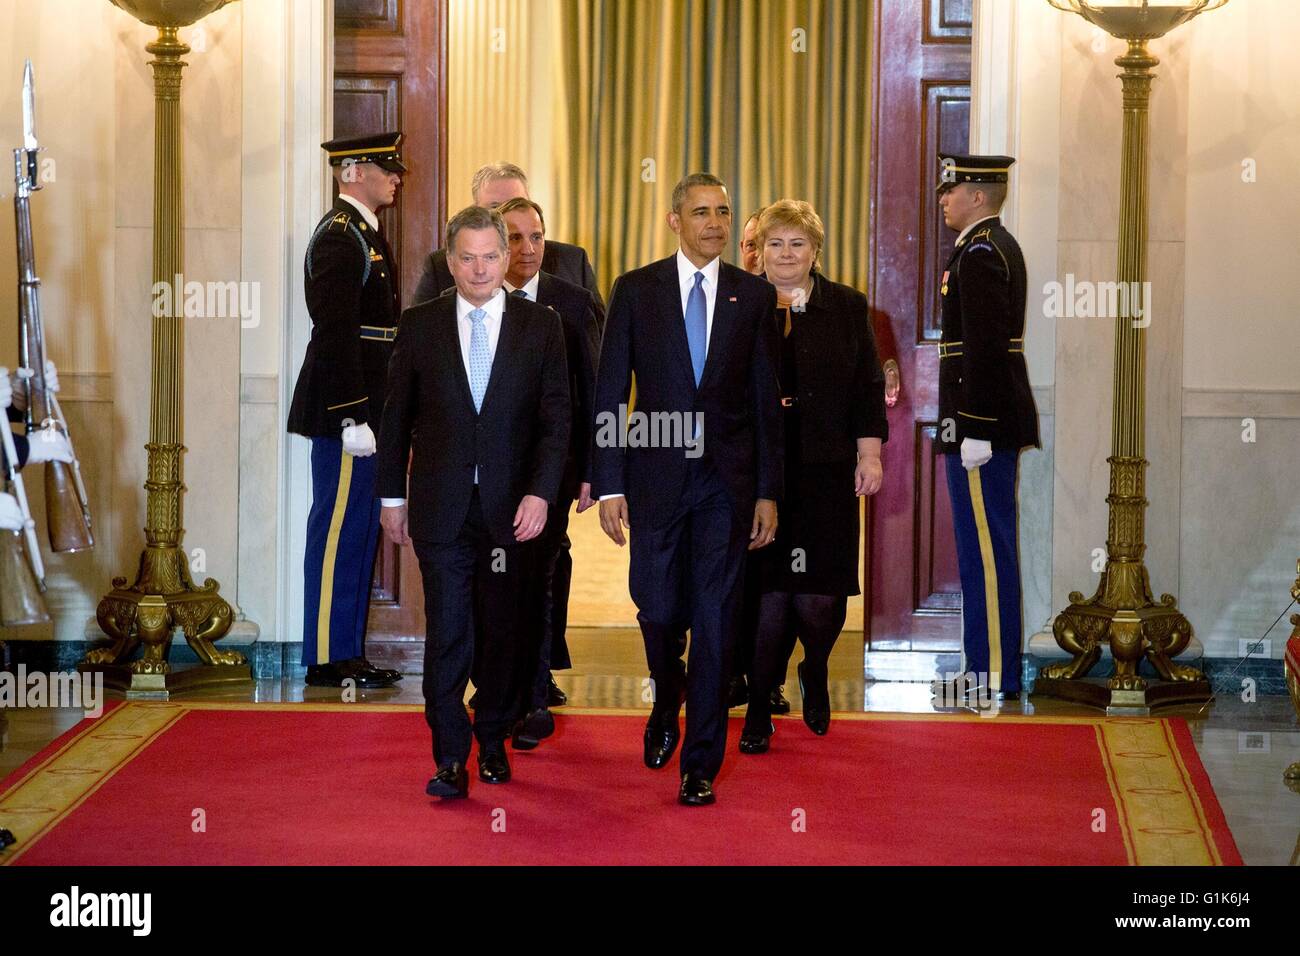 U.S President Barack Obama walks with Nordic leaders in the Cross Hall before the arrival ceremony at the White House May 13, 2016 in Washington, DC. Stock Photo